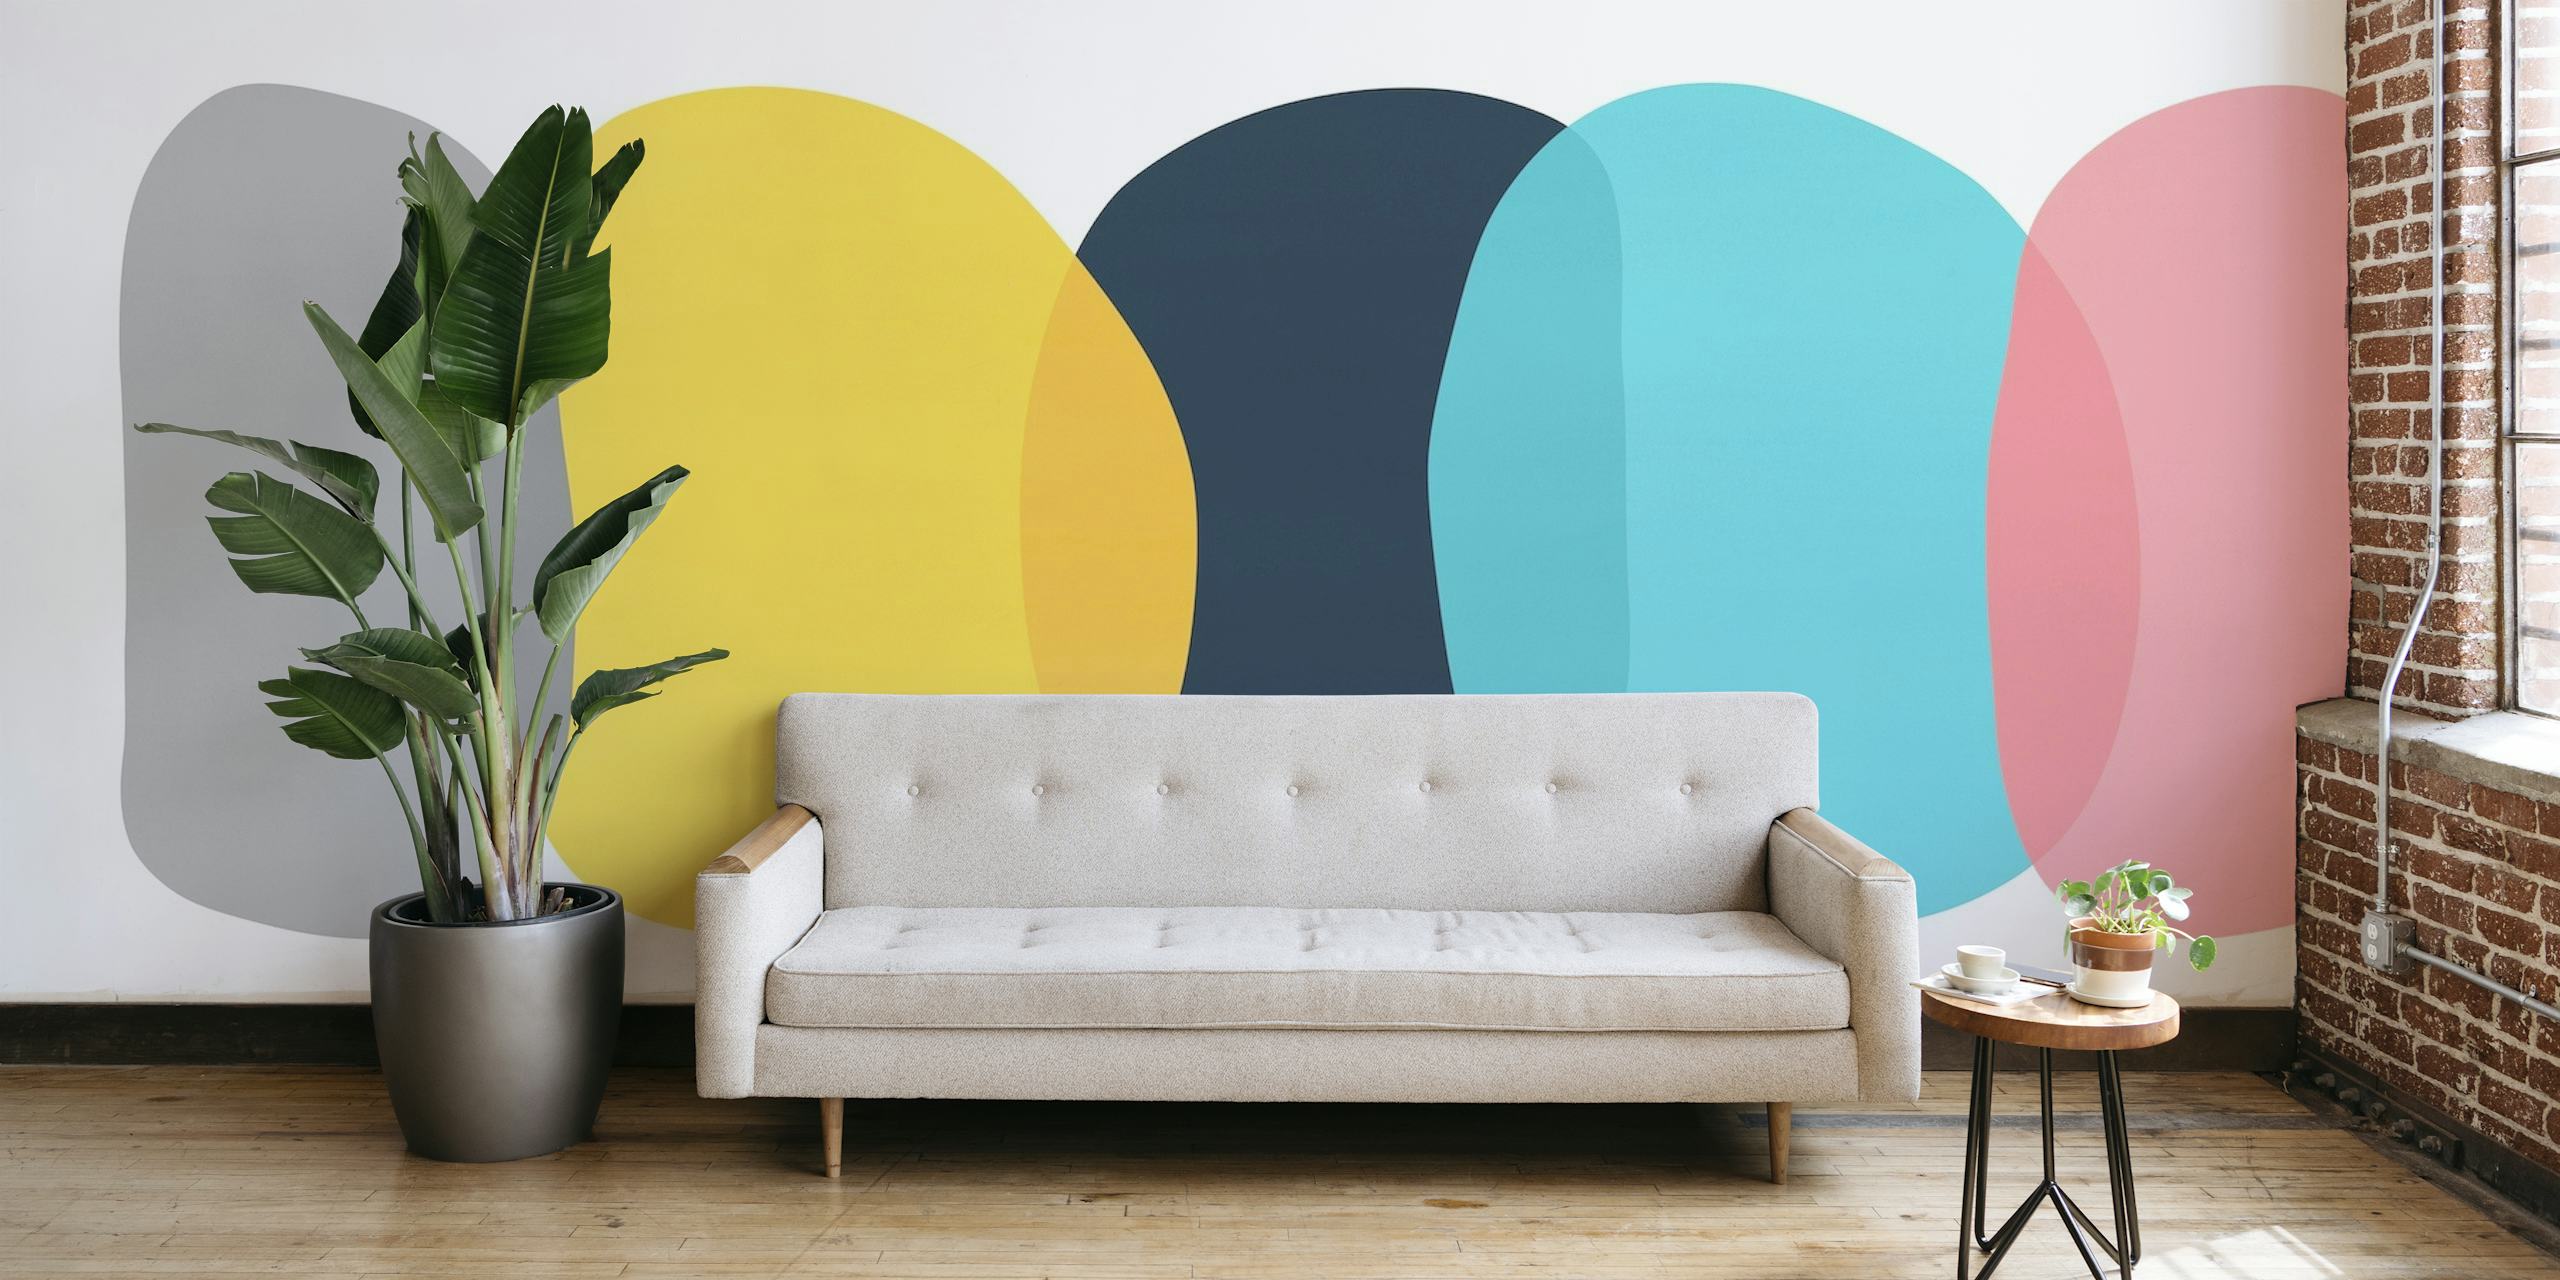 Abstract shapes wall mural with muted colors and geometric design